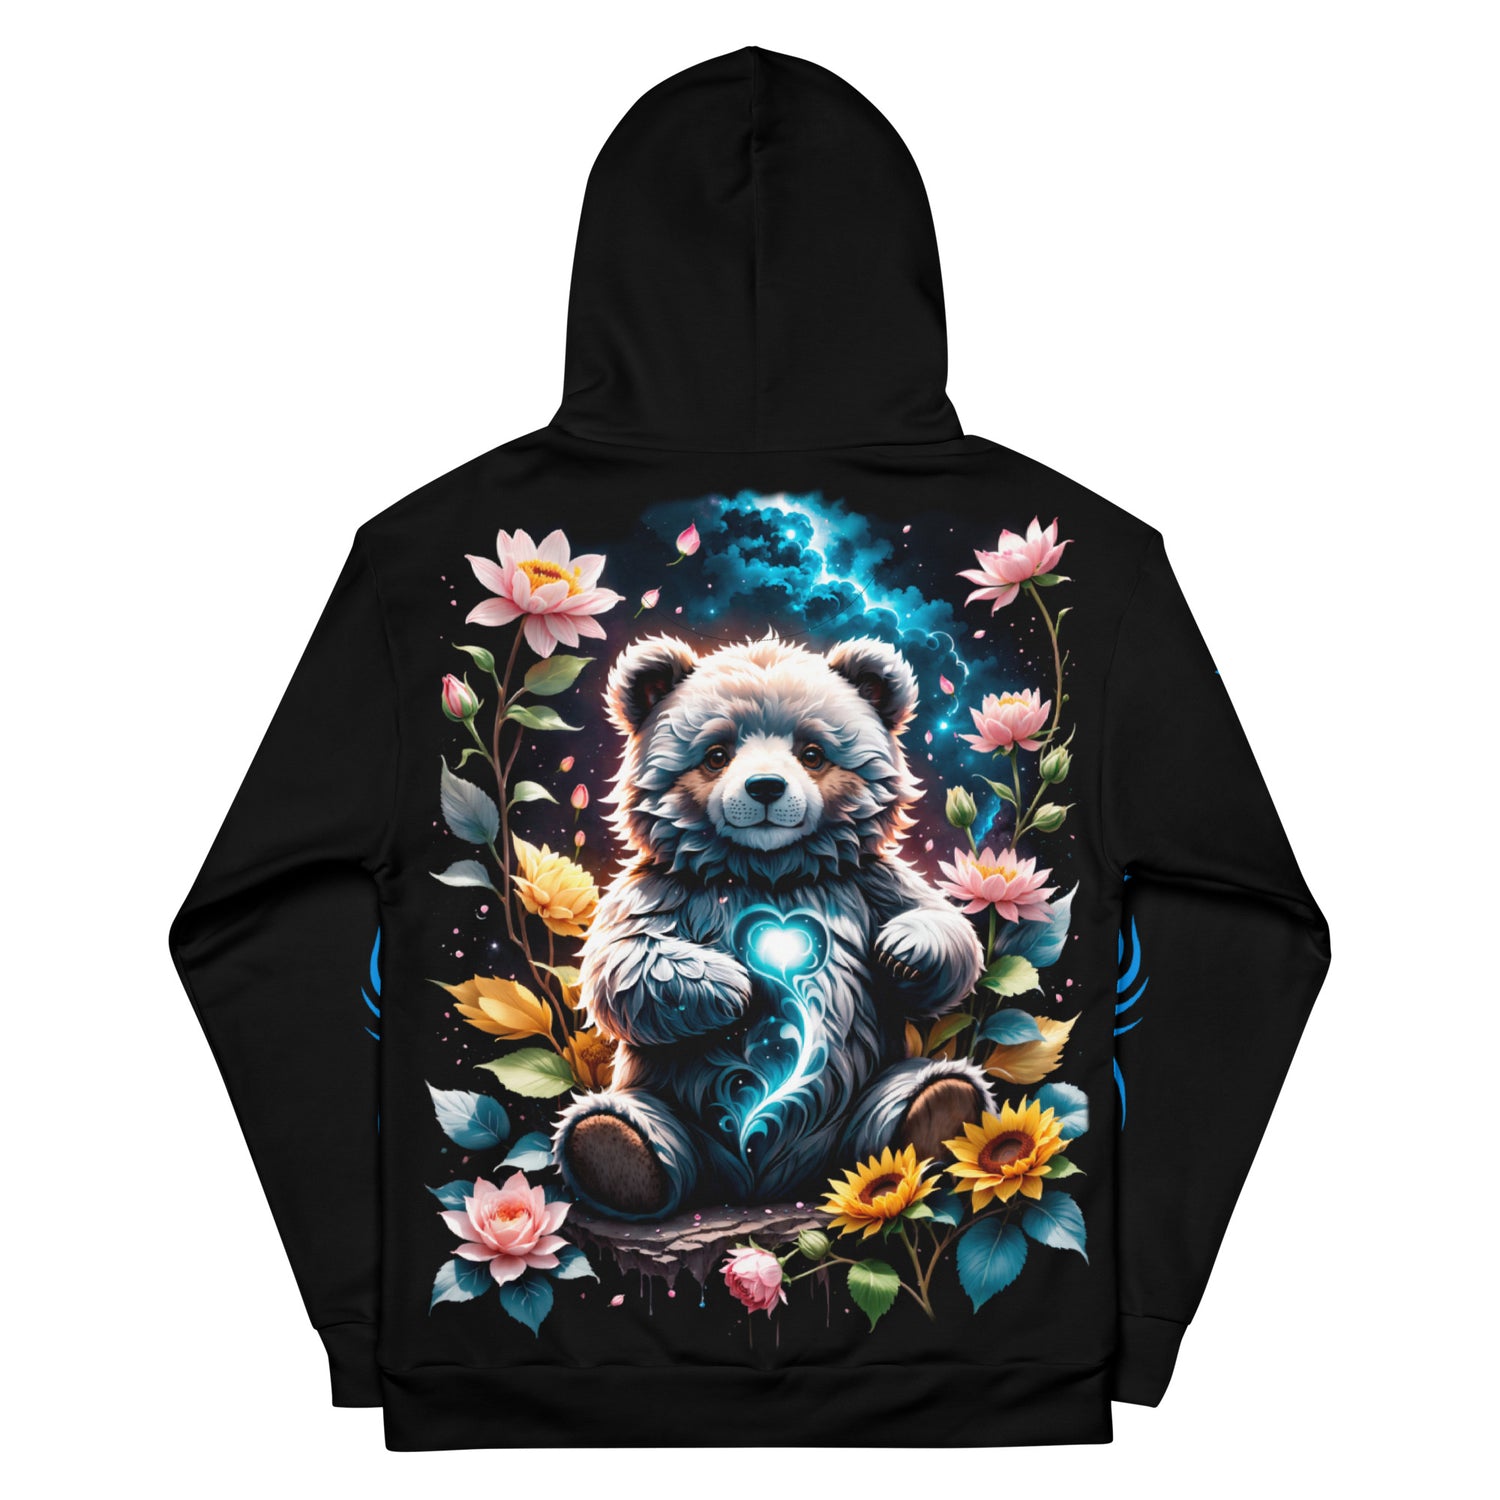 Eco-friendly women's hoodie featuring a panda in a blooming enchanted forest design, combining sustainability with enchanting fashion.